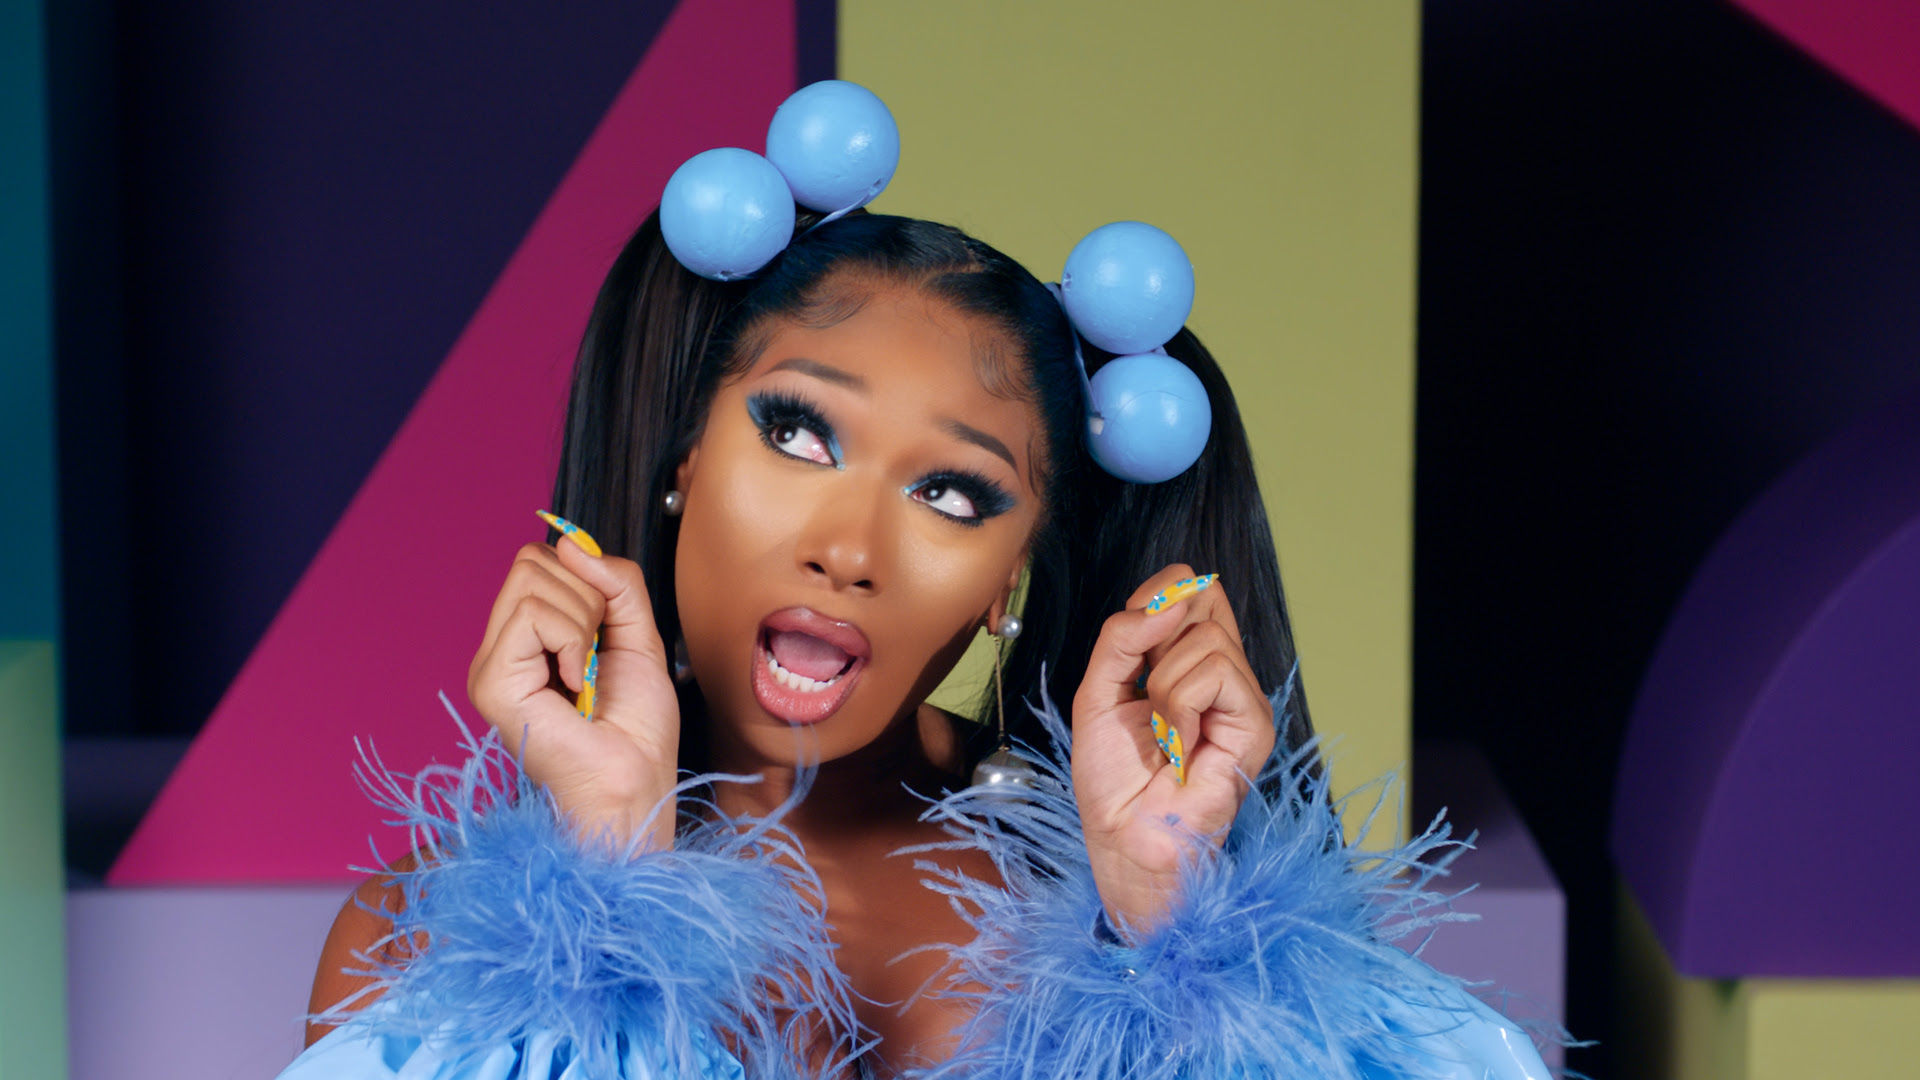 Megan Thee Stallion and DaBaby Link for “Cry Baby” Video